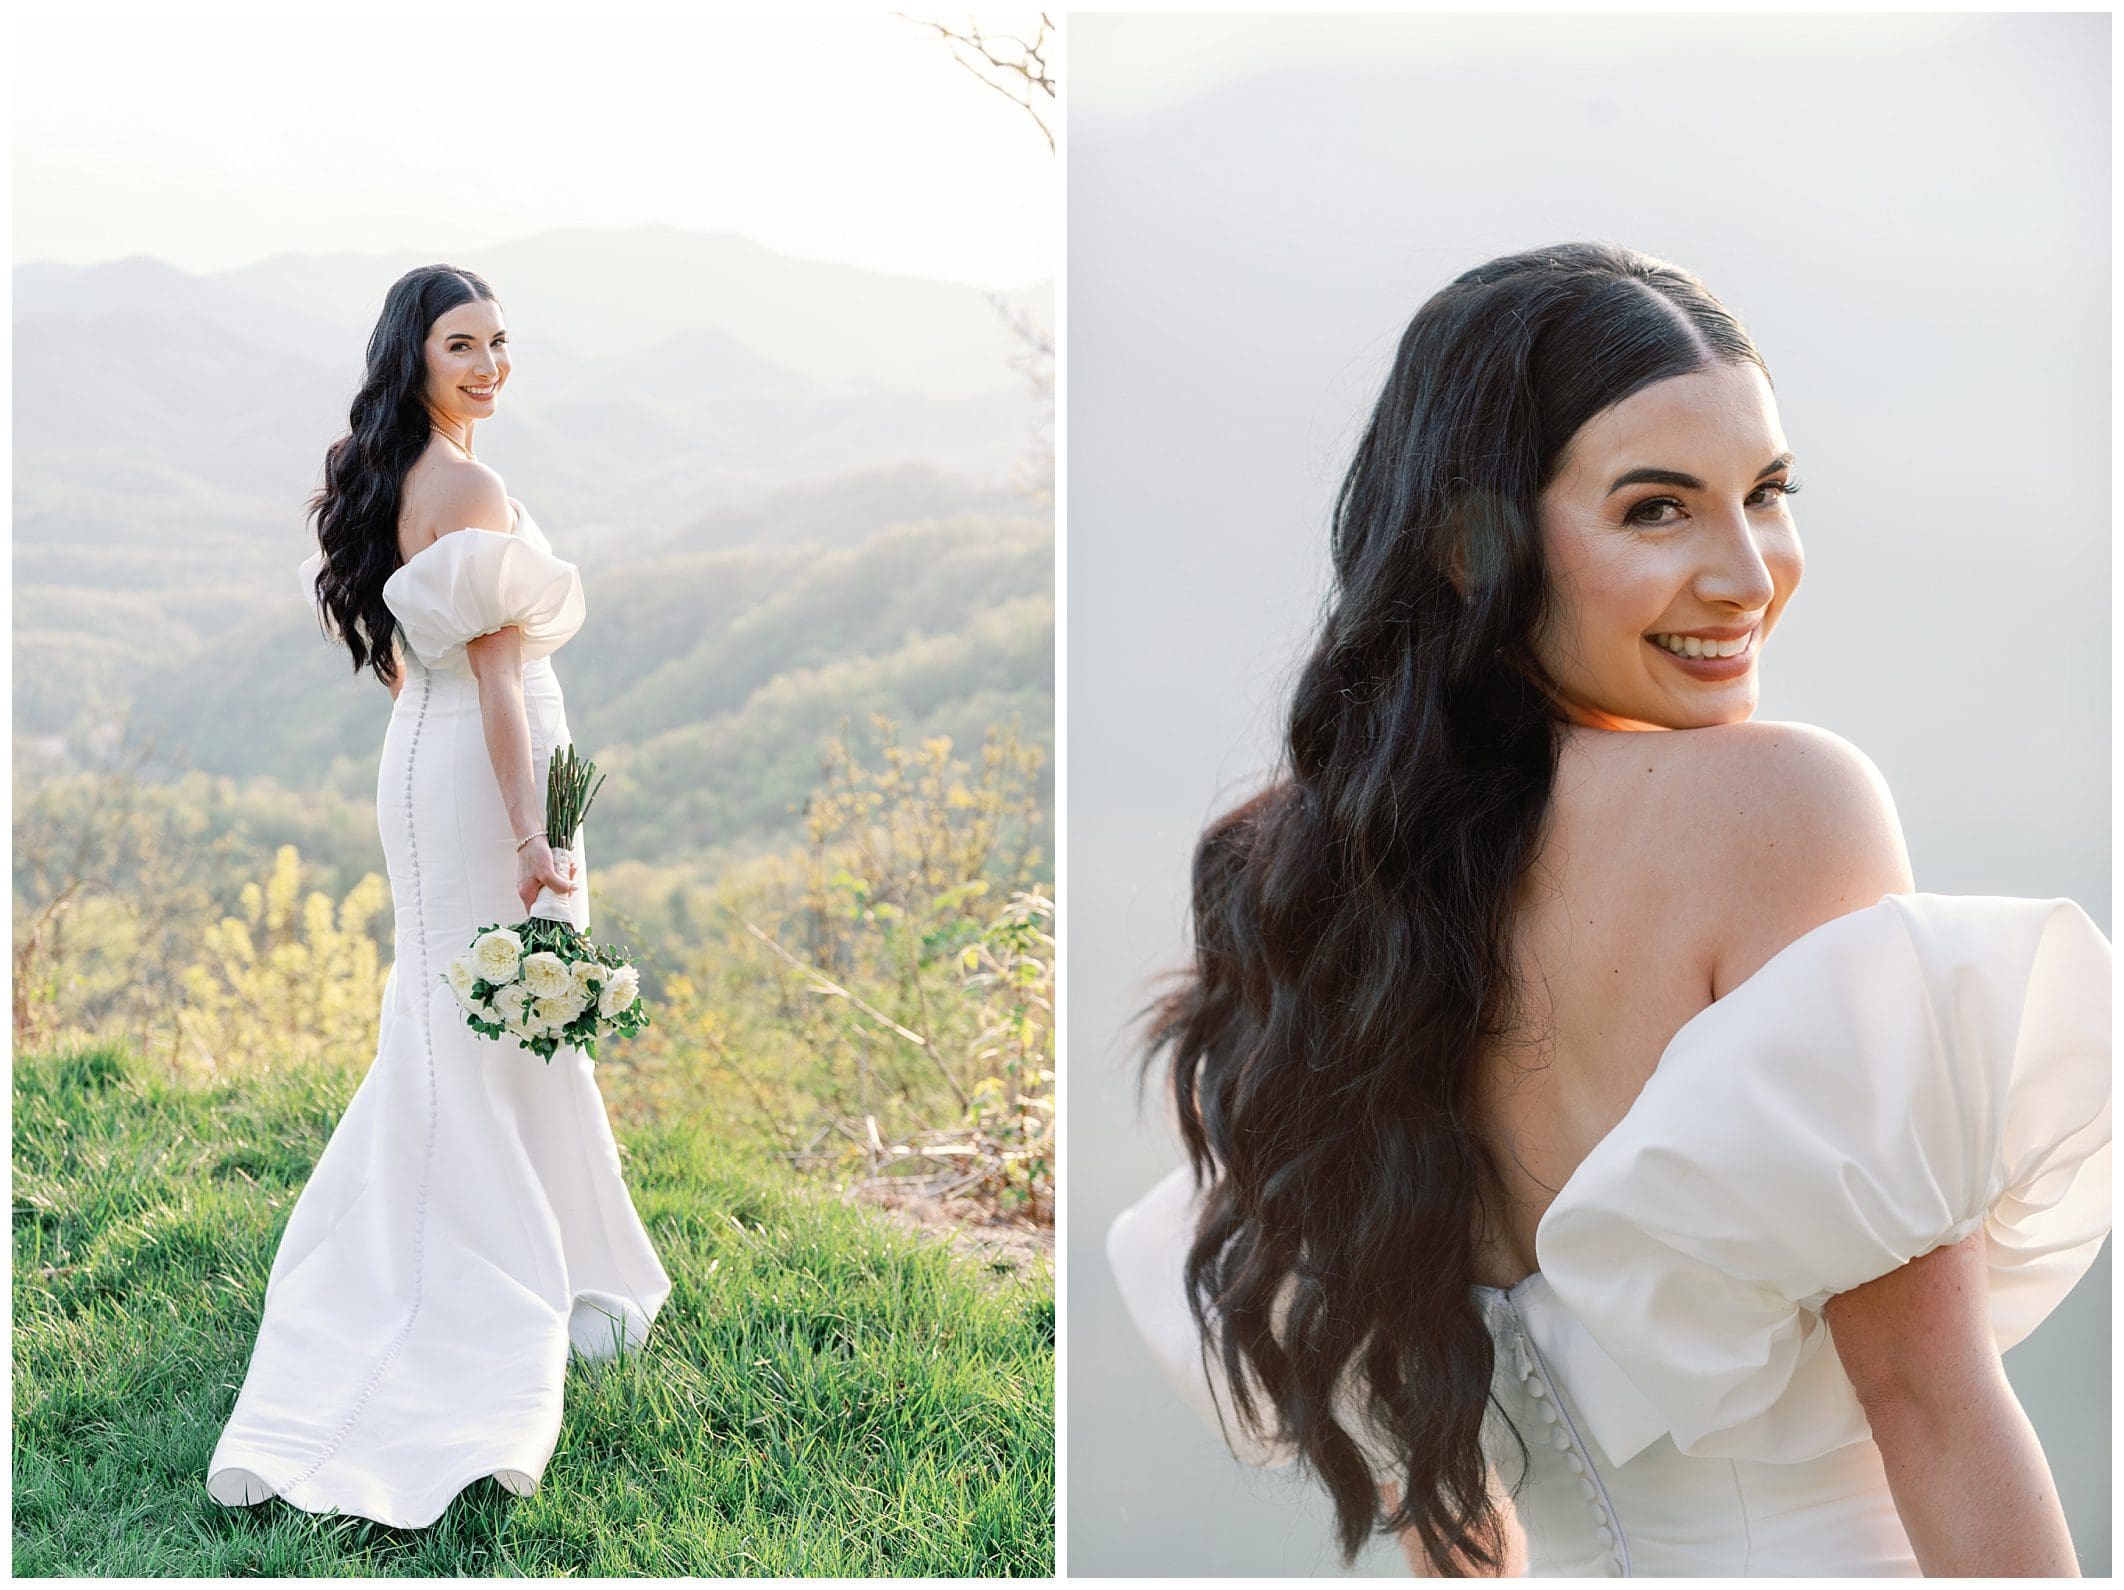 A bride holding a bouquet, smiling in a mountainous landscape on the left, and a close-up of her smiling over her shoulder on the right.